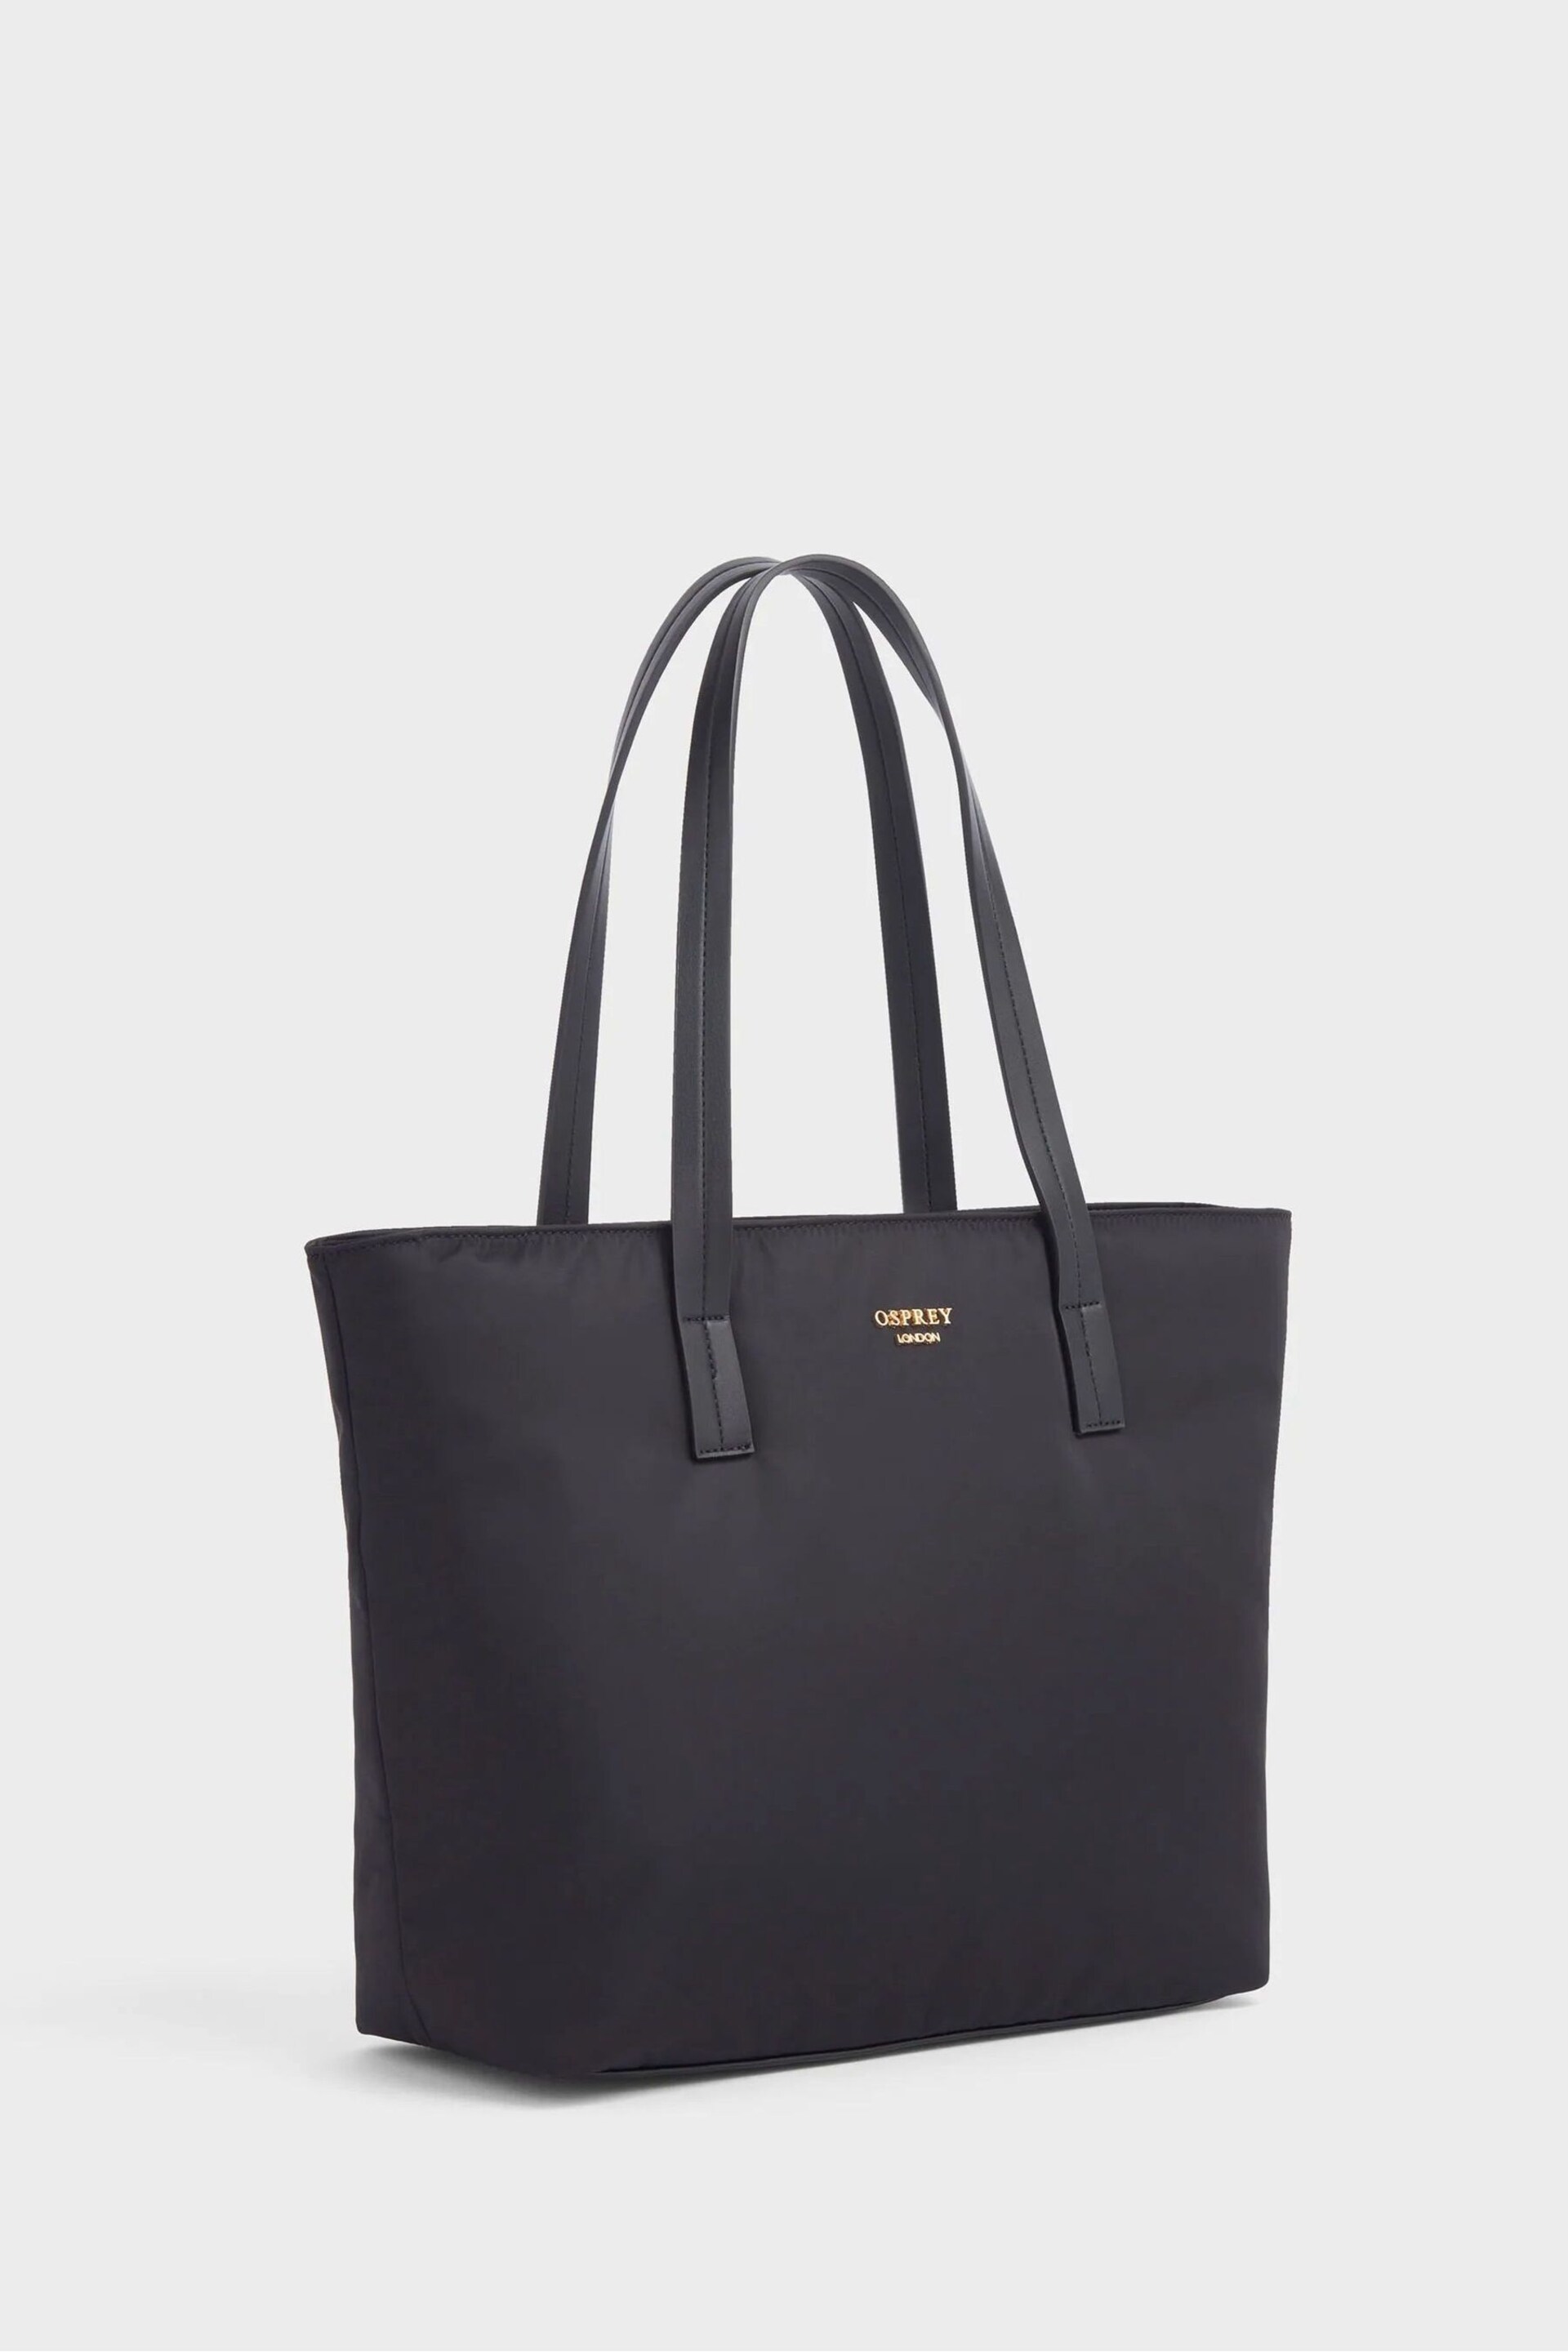 OSPREY LONDON The Wanderer Nylon Tote Bag With RFID Protection - Image 3 of 4